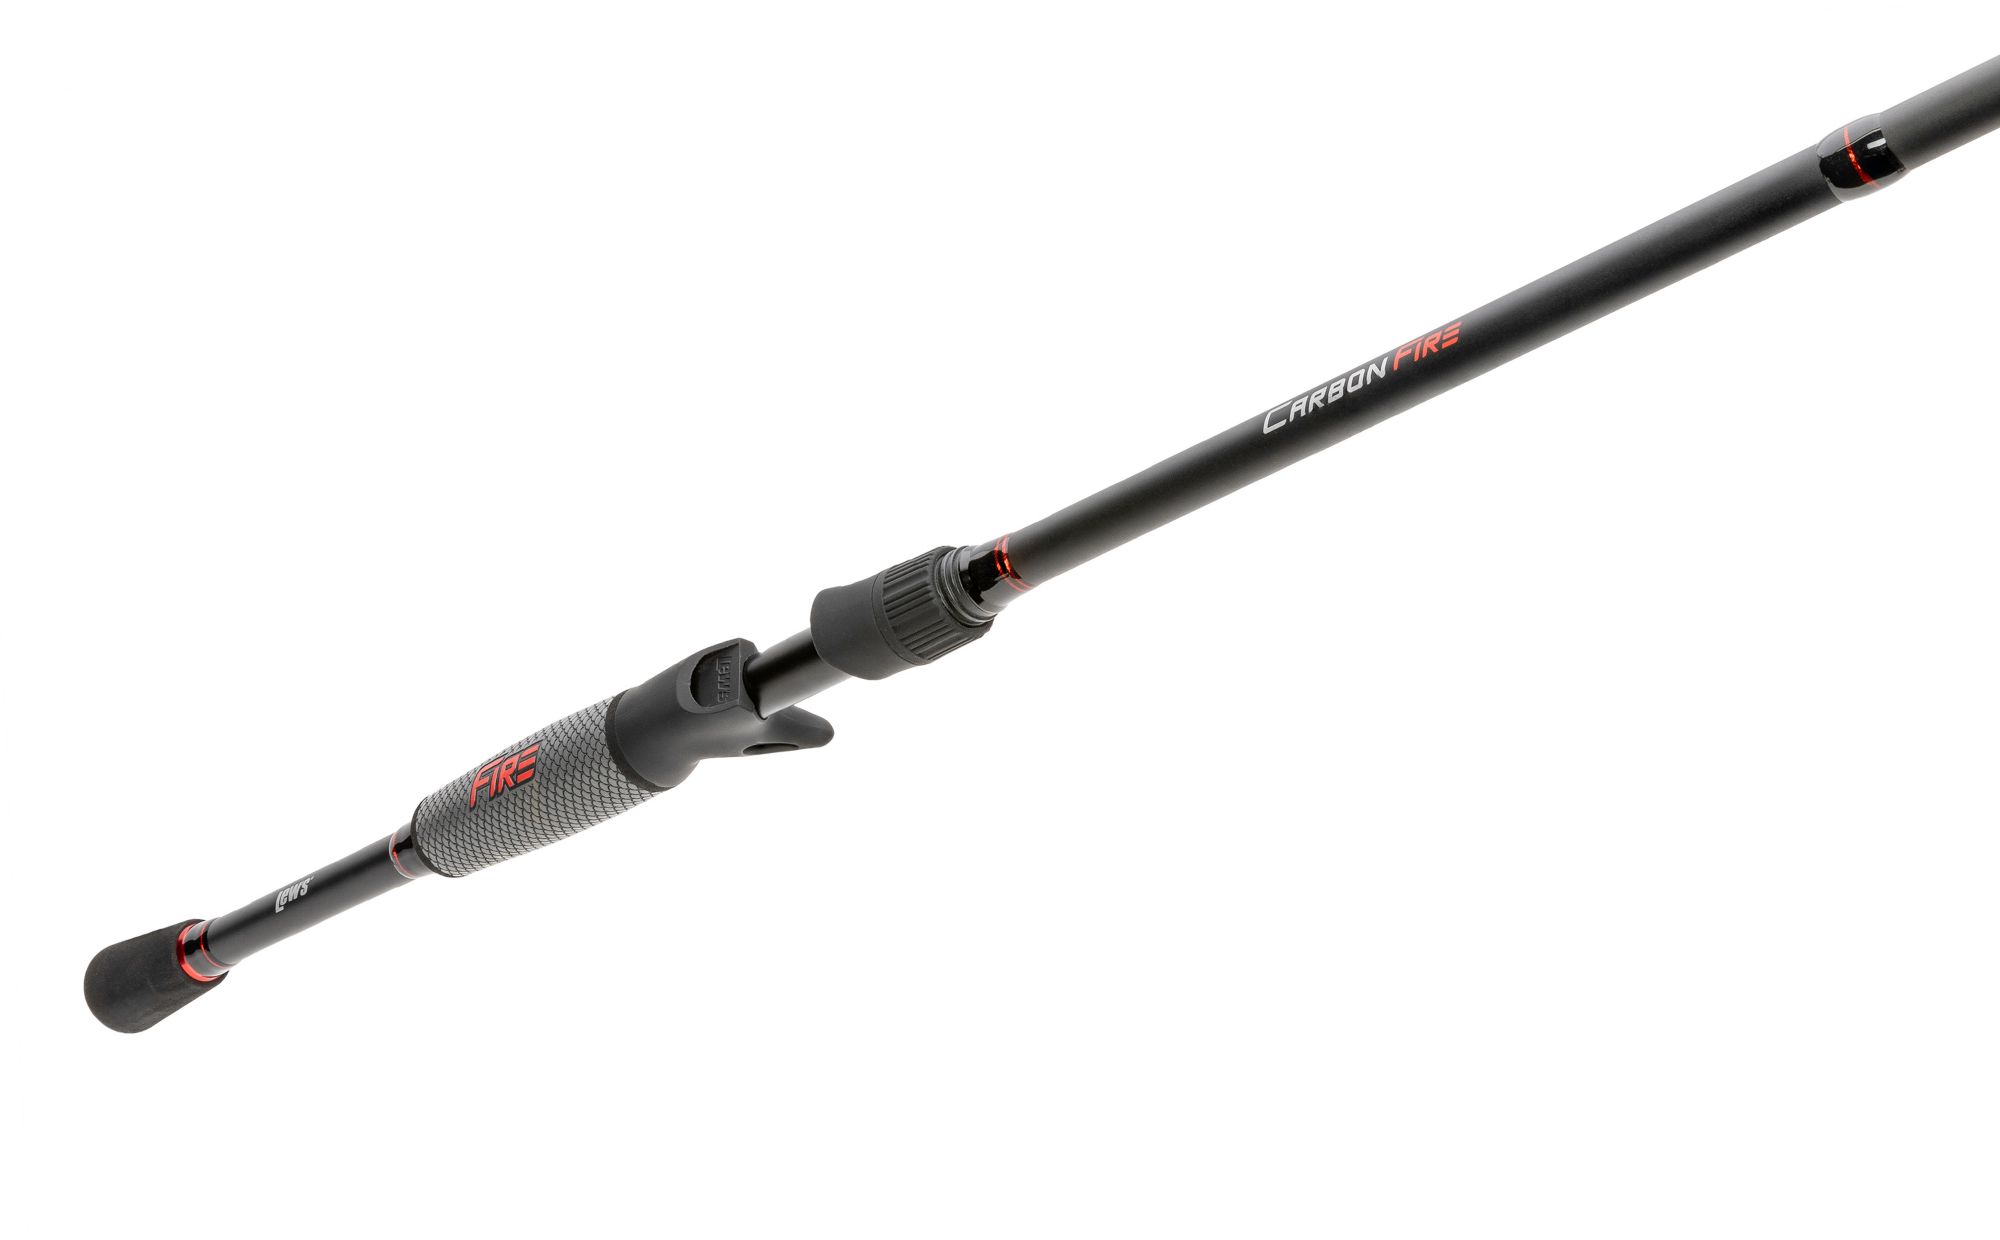 Dick's Sporting Goods Lew's Carbon Fire Casting Rod